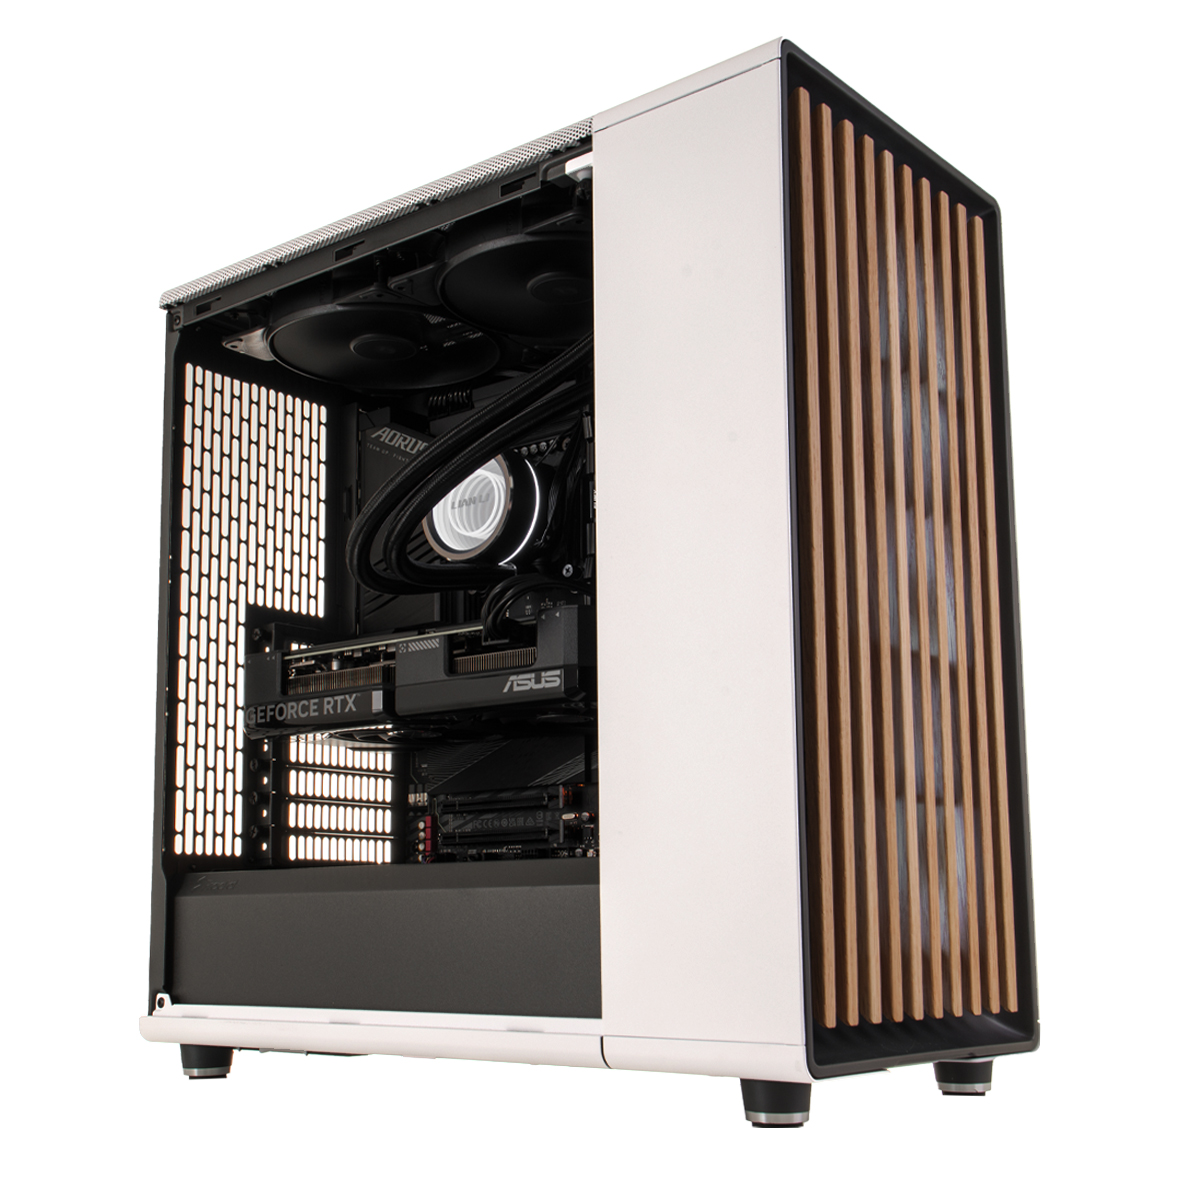 Fractal Design Focus G - Mid Tower Computer Case - ATX - High Airflow - 2X  Fractal Design Silent LL Series 120mm White LED Fans Included - USB 3.0 